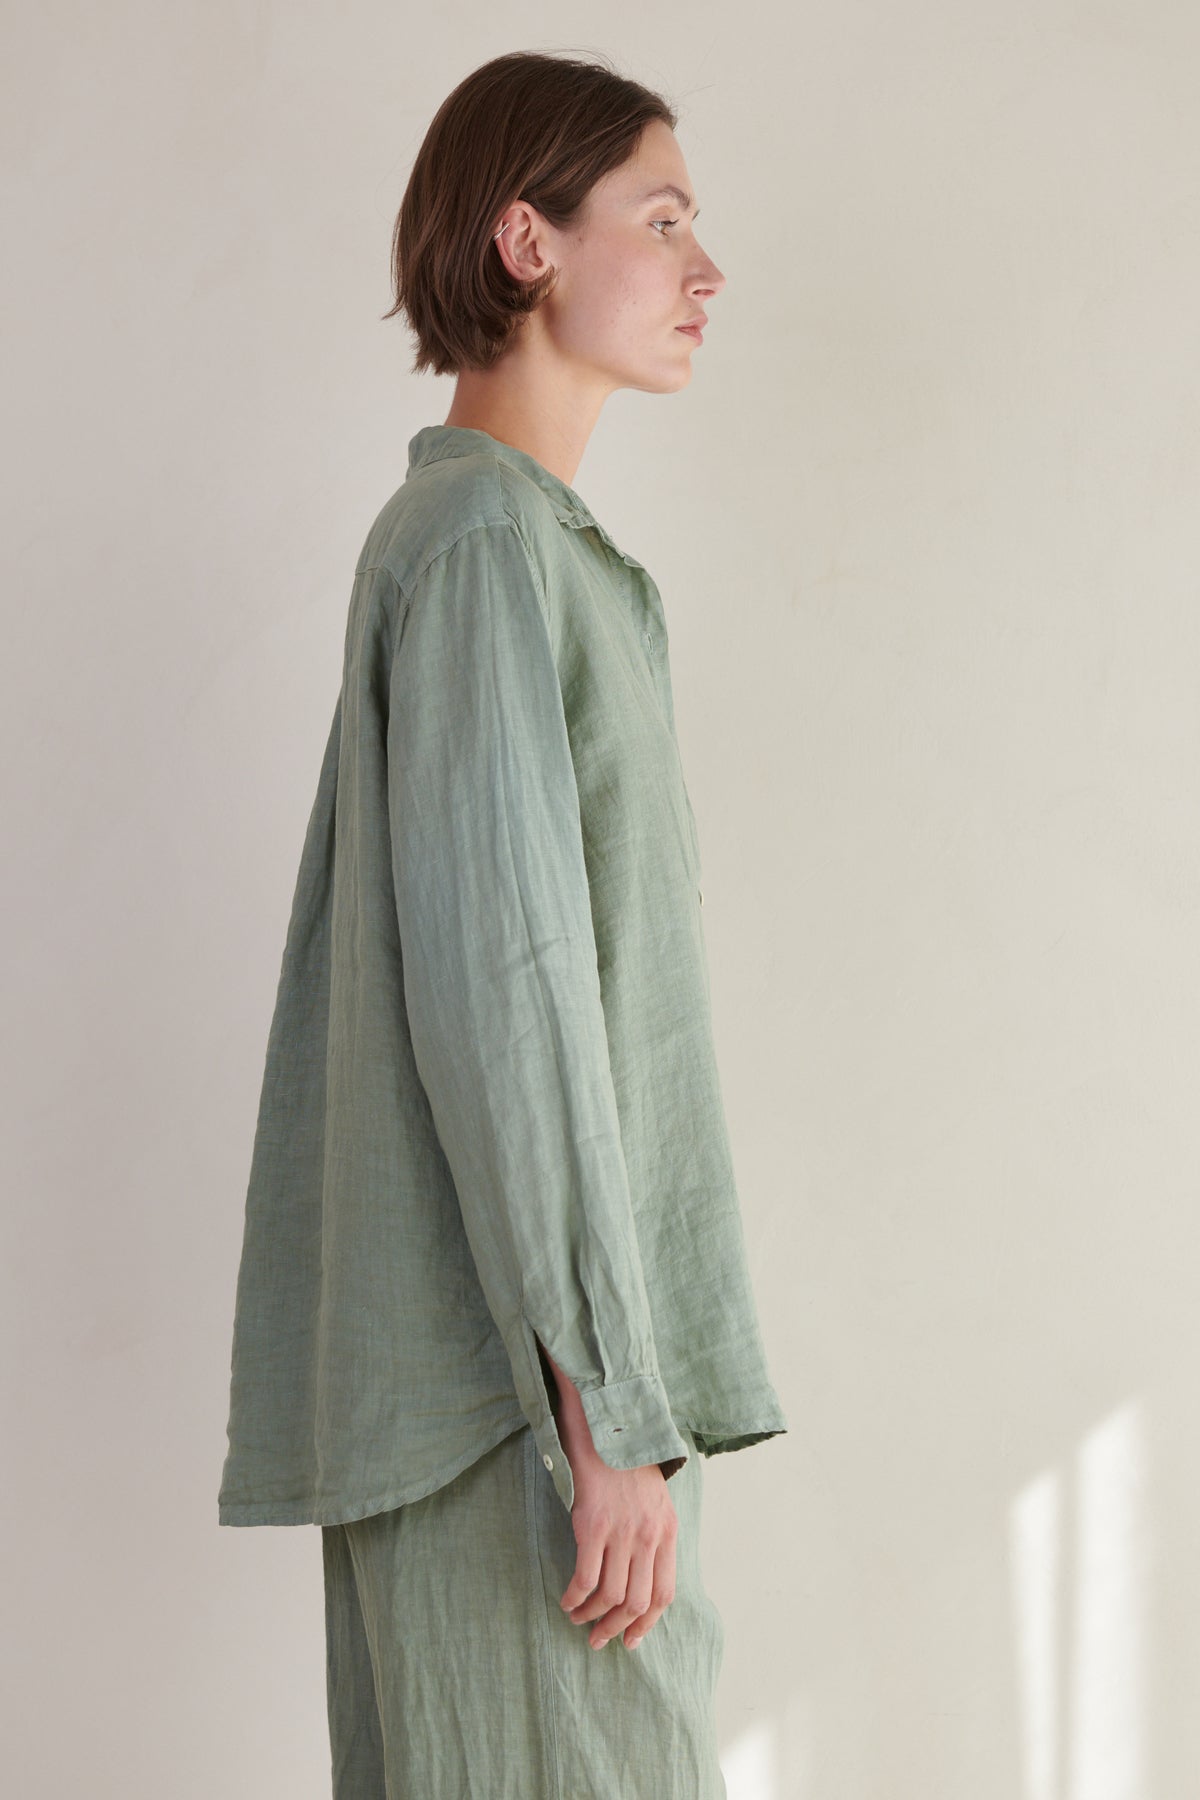 a woman wearing a Green Linen MULHOLLAND SHIRT by Velvet by Jenny Graham and pants.-26293074657473